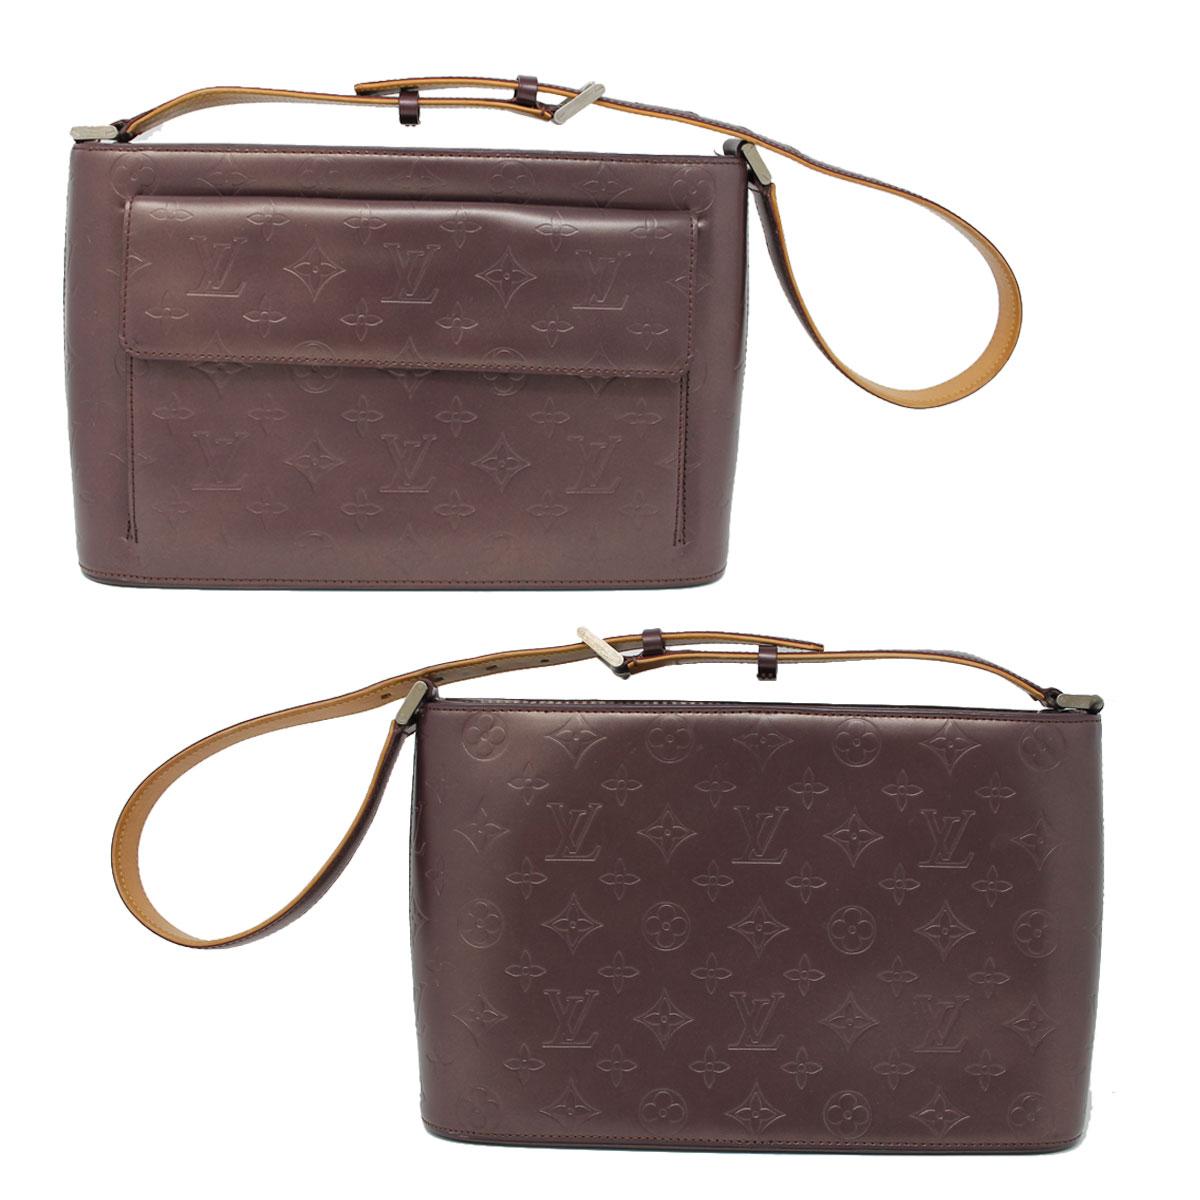 Brand: Louis Vuitton
Style: Handbag
Handles: Purple Leather Shoulder Strap, adjustable from 10″ – 12″
Measurements: 12″ x 3.5″ x 7.5″
Materials: Monogram Mat Embossed leather with semi-metallic finish
Hardware & Lining: Cowhide Leather Trim,